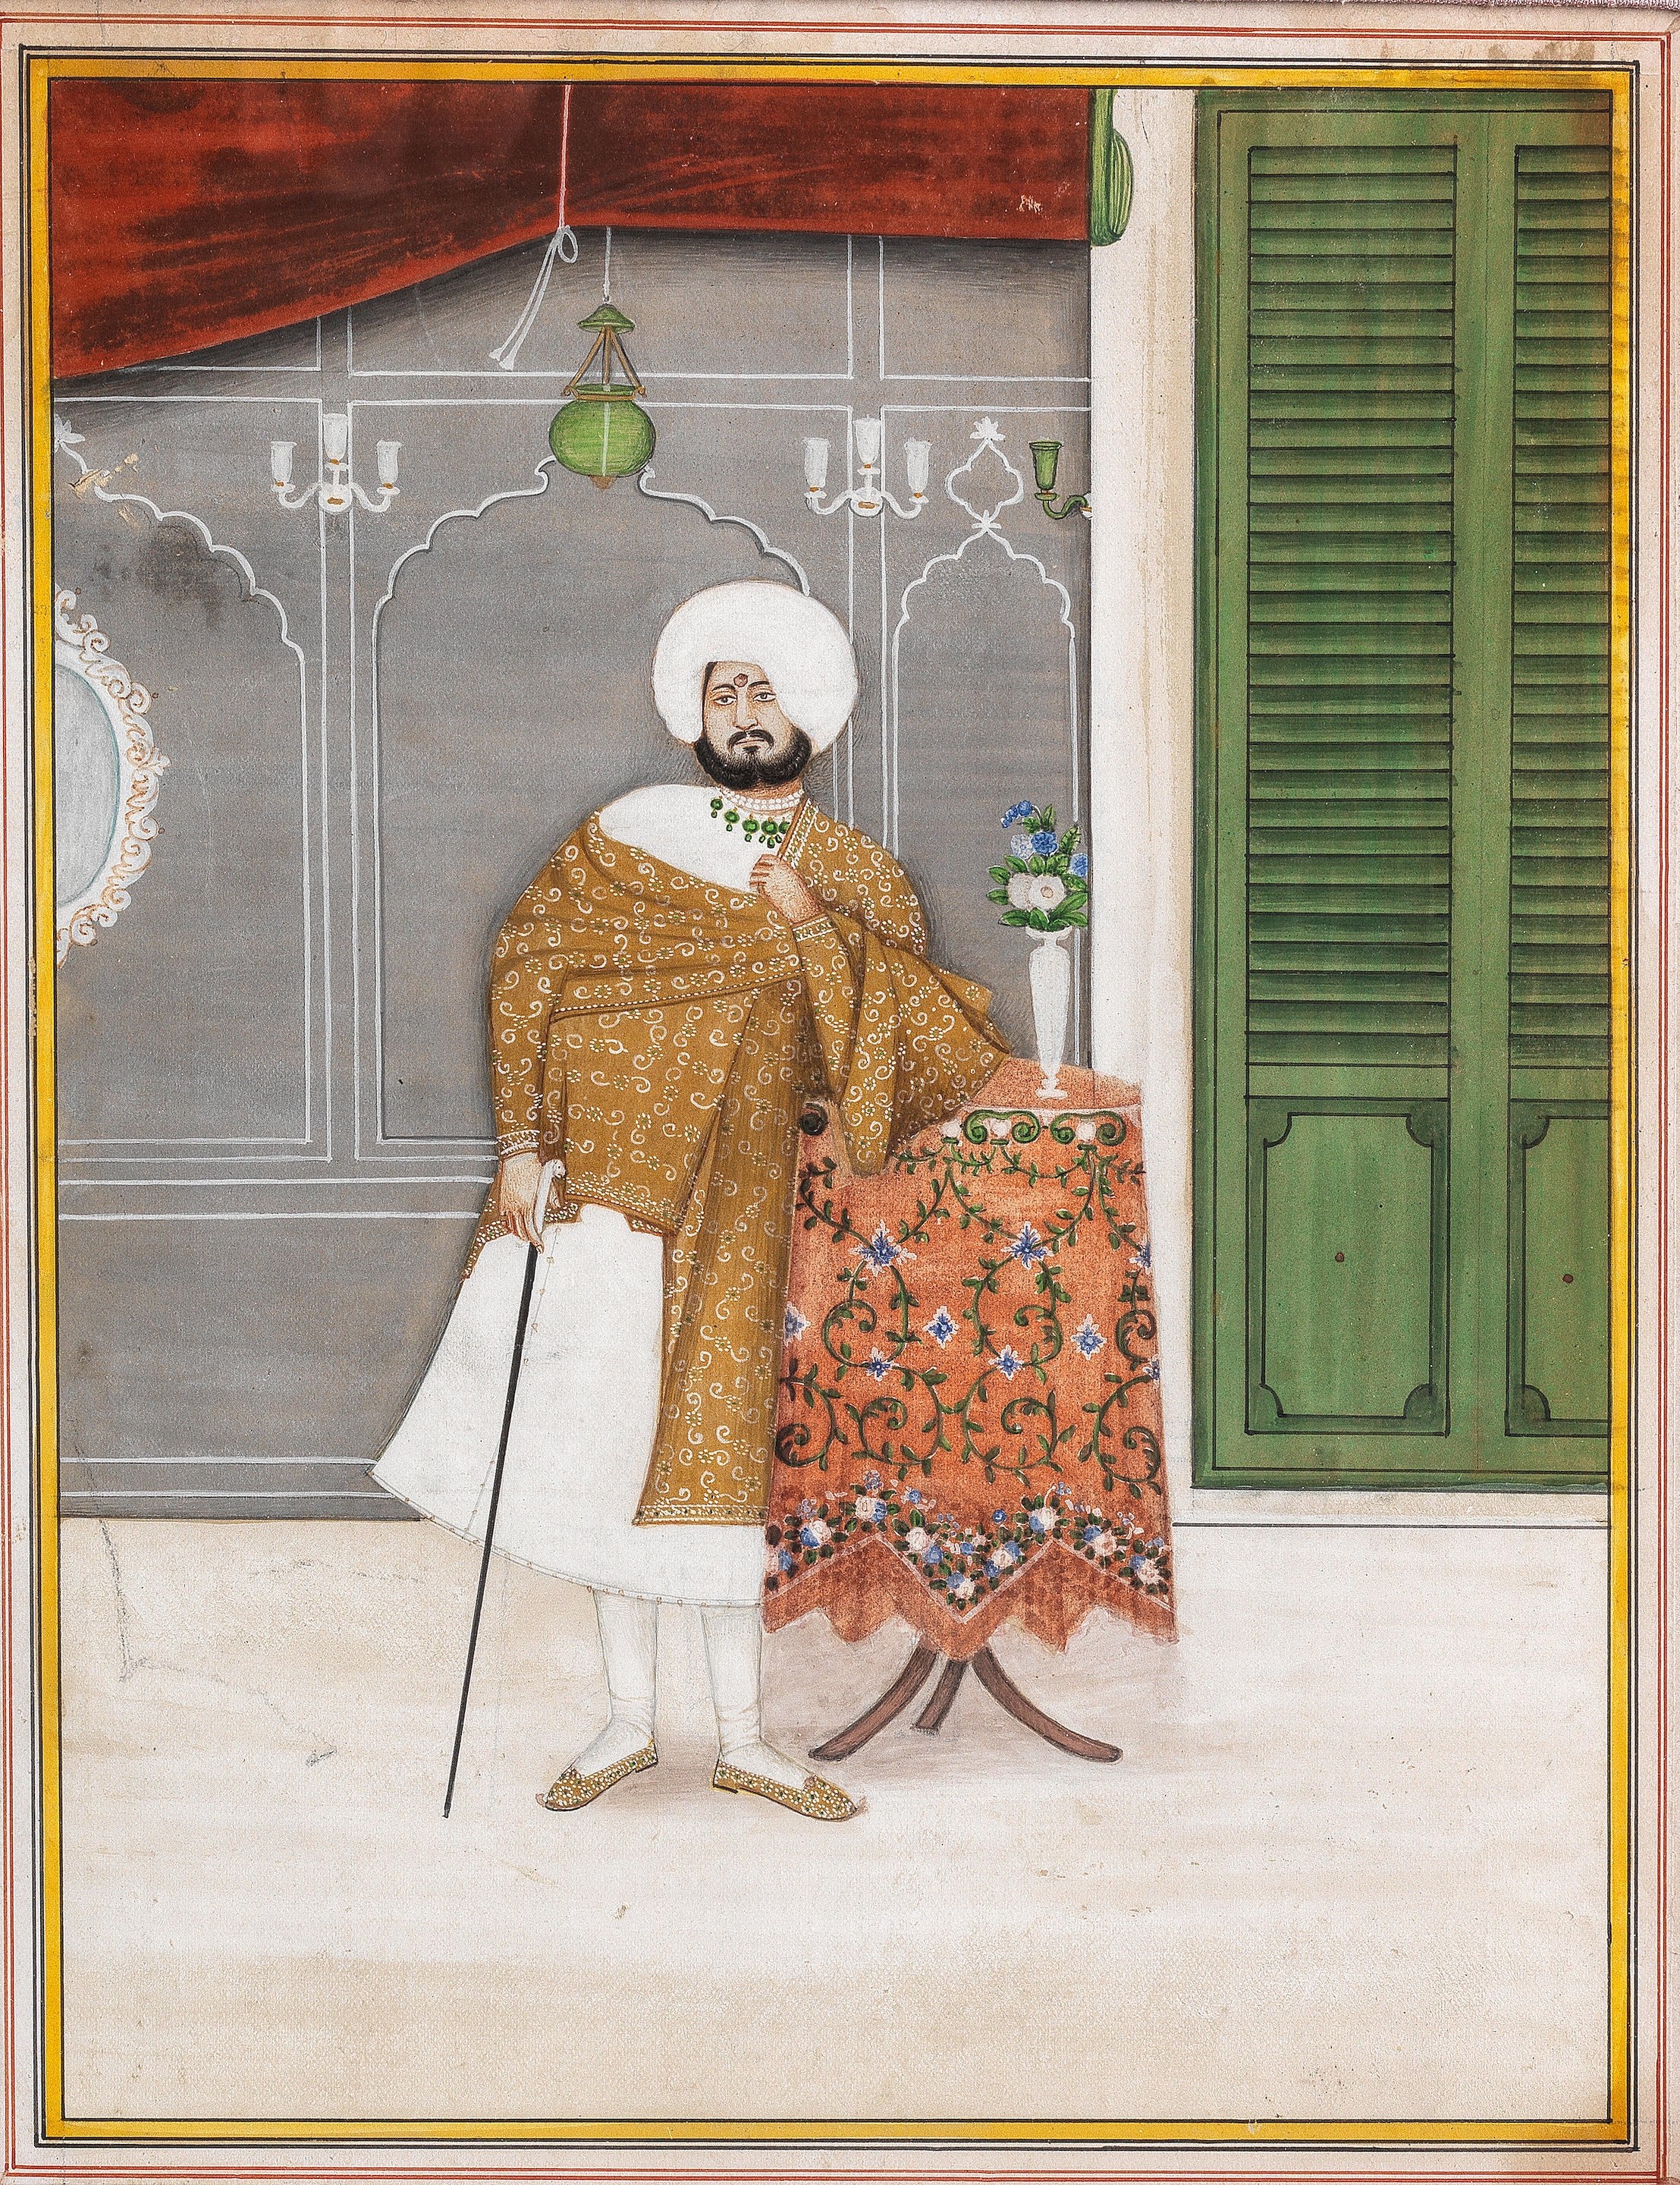 Artwork by Punjab School, 19th Century, Maharaja Bhagwan Singh of Nabha (reg. 1863-71) standing in an interior, Made of gouache and gold on paper